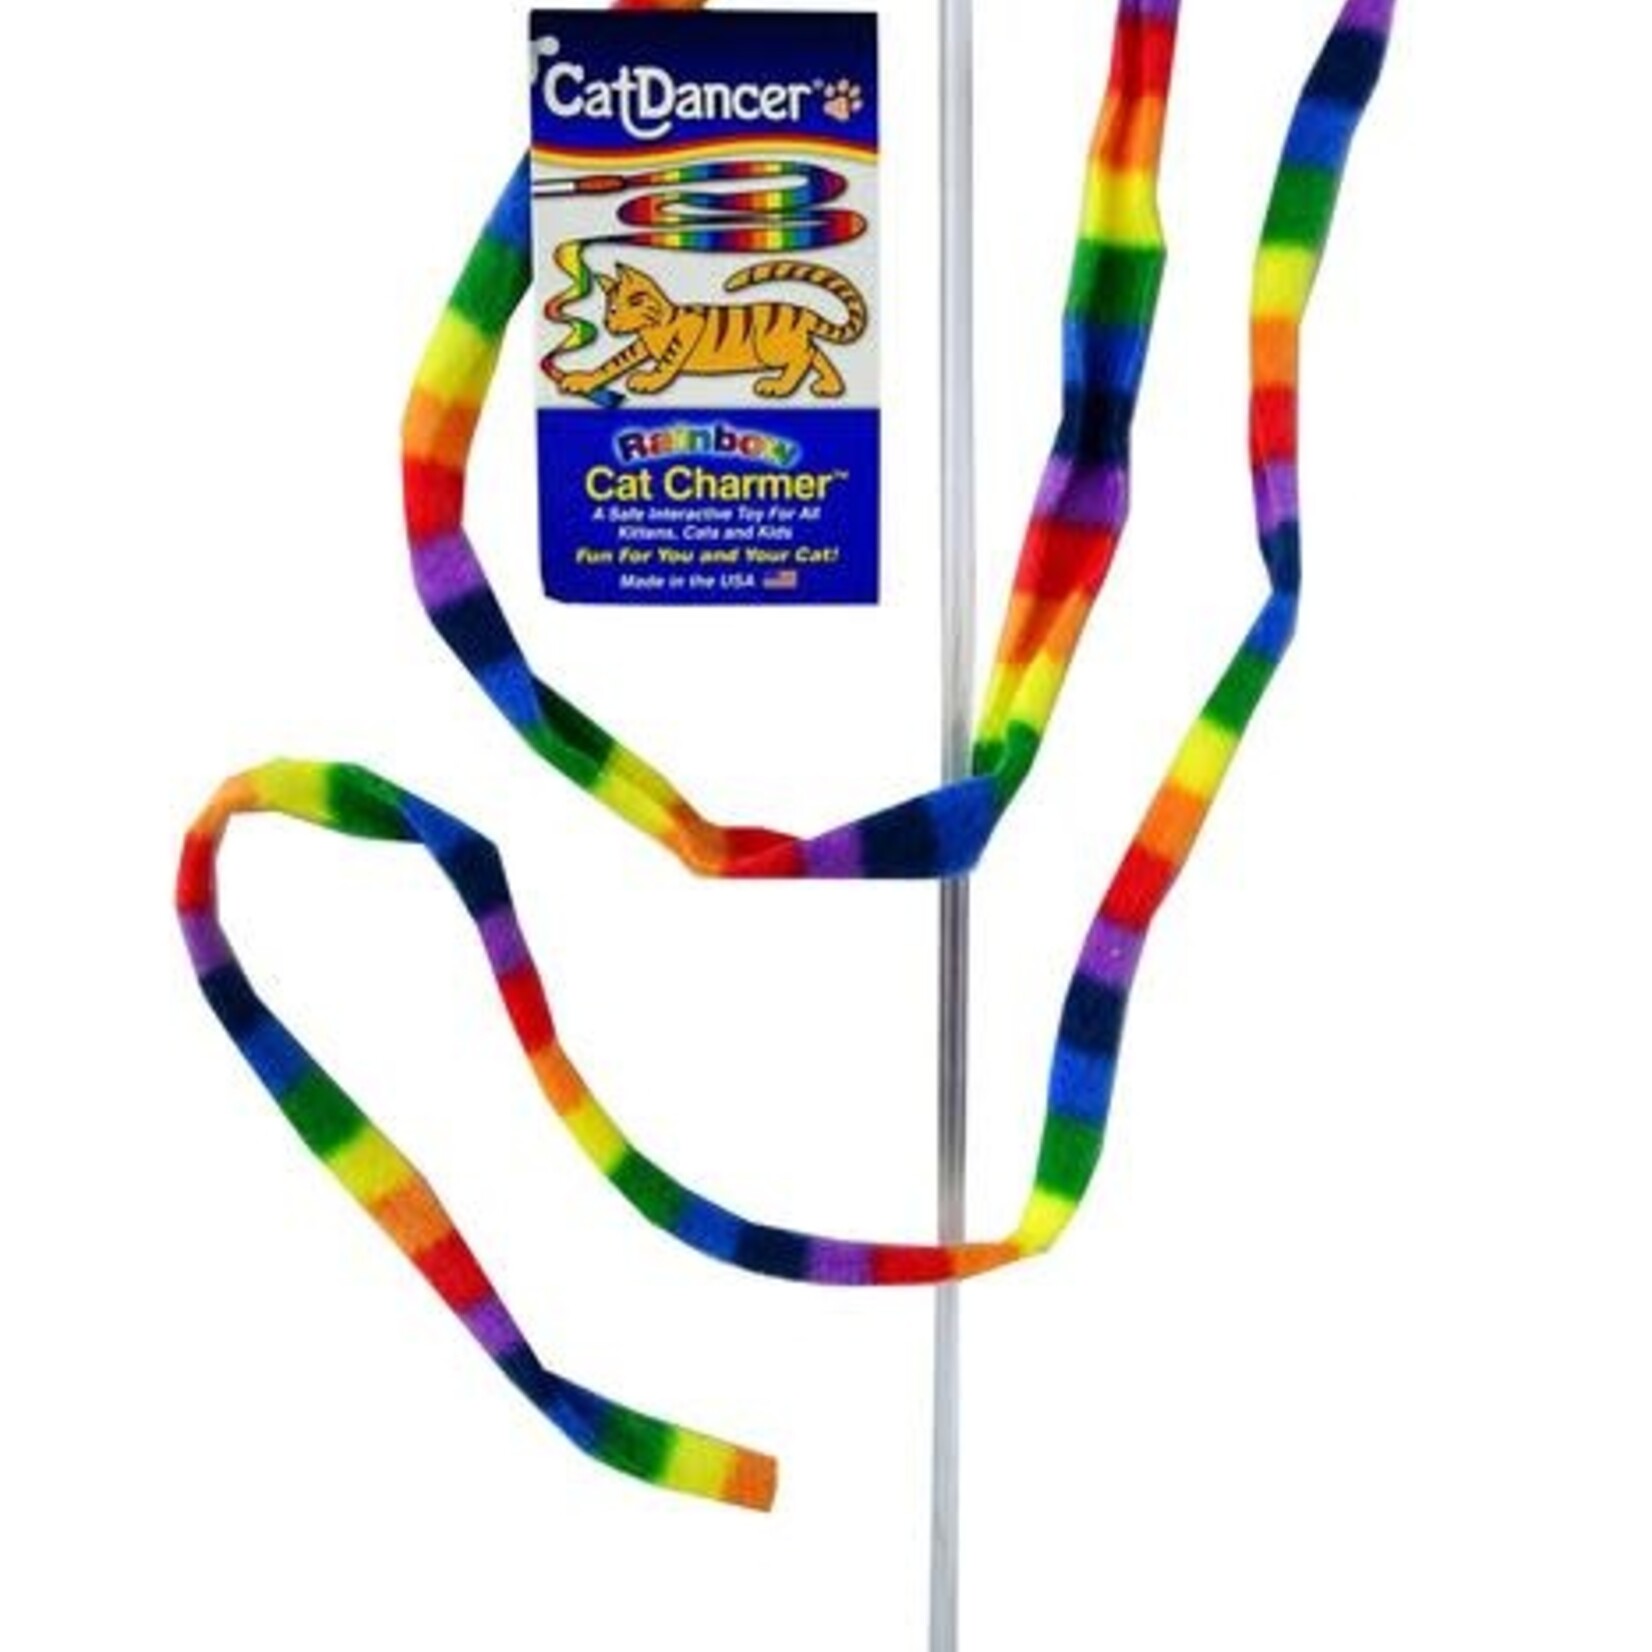 Cat Charmer Wand Toy